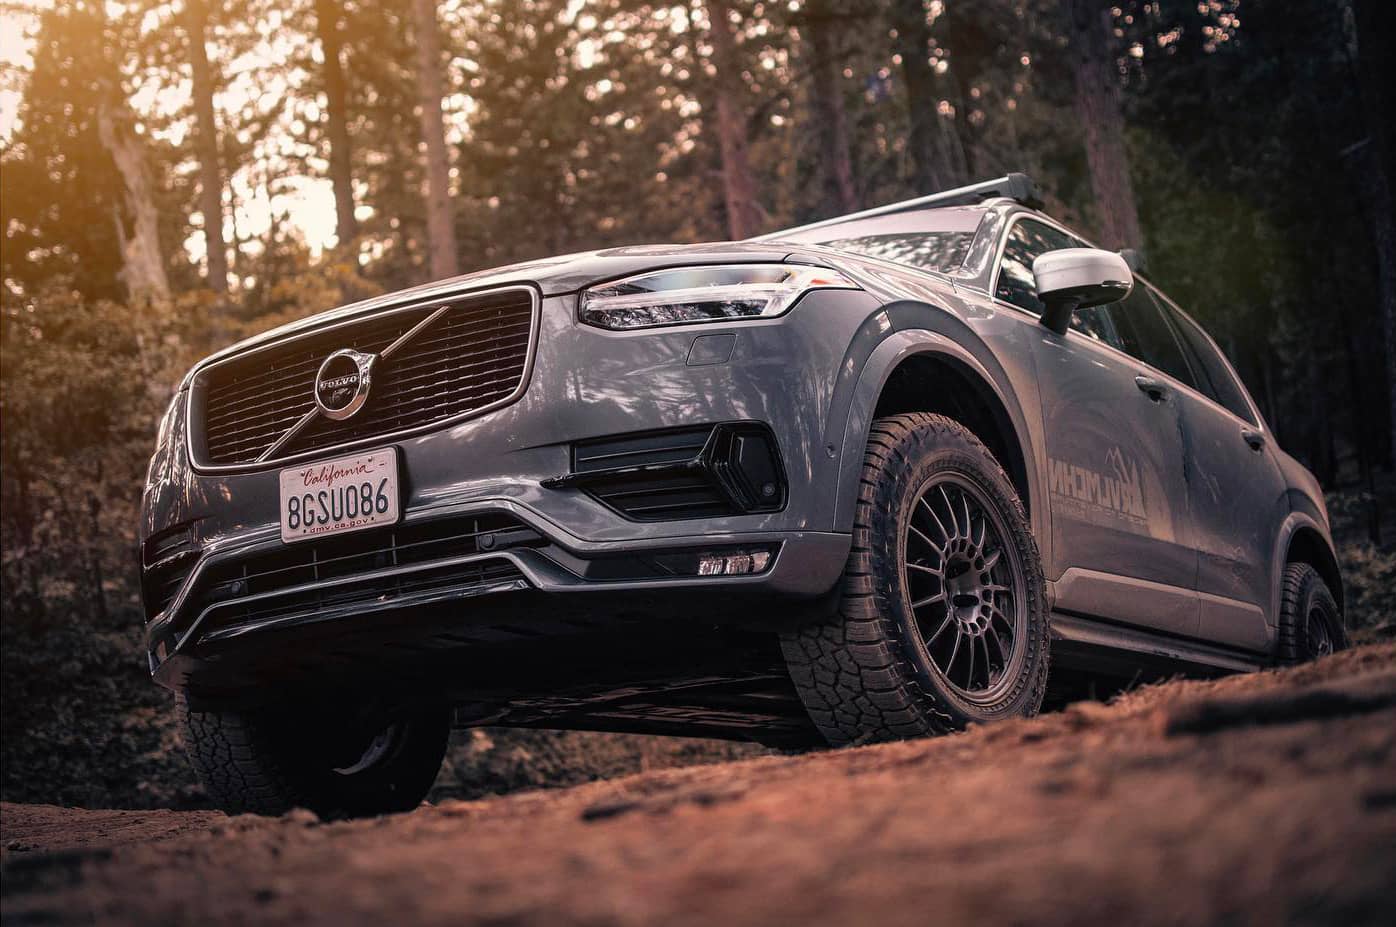 Lifted Volvo XC90 on 32 inch off-road wheels